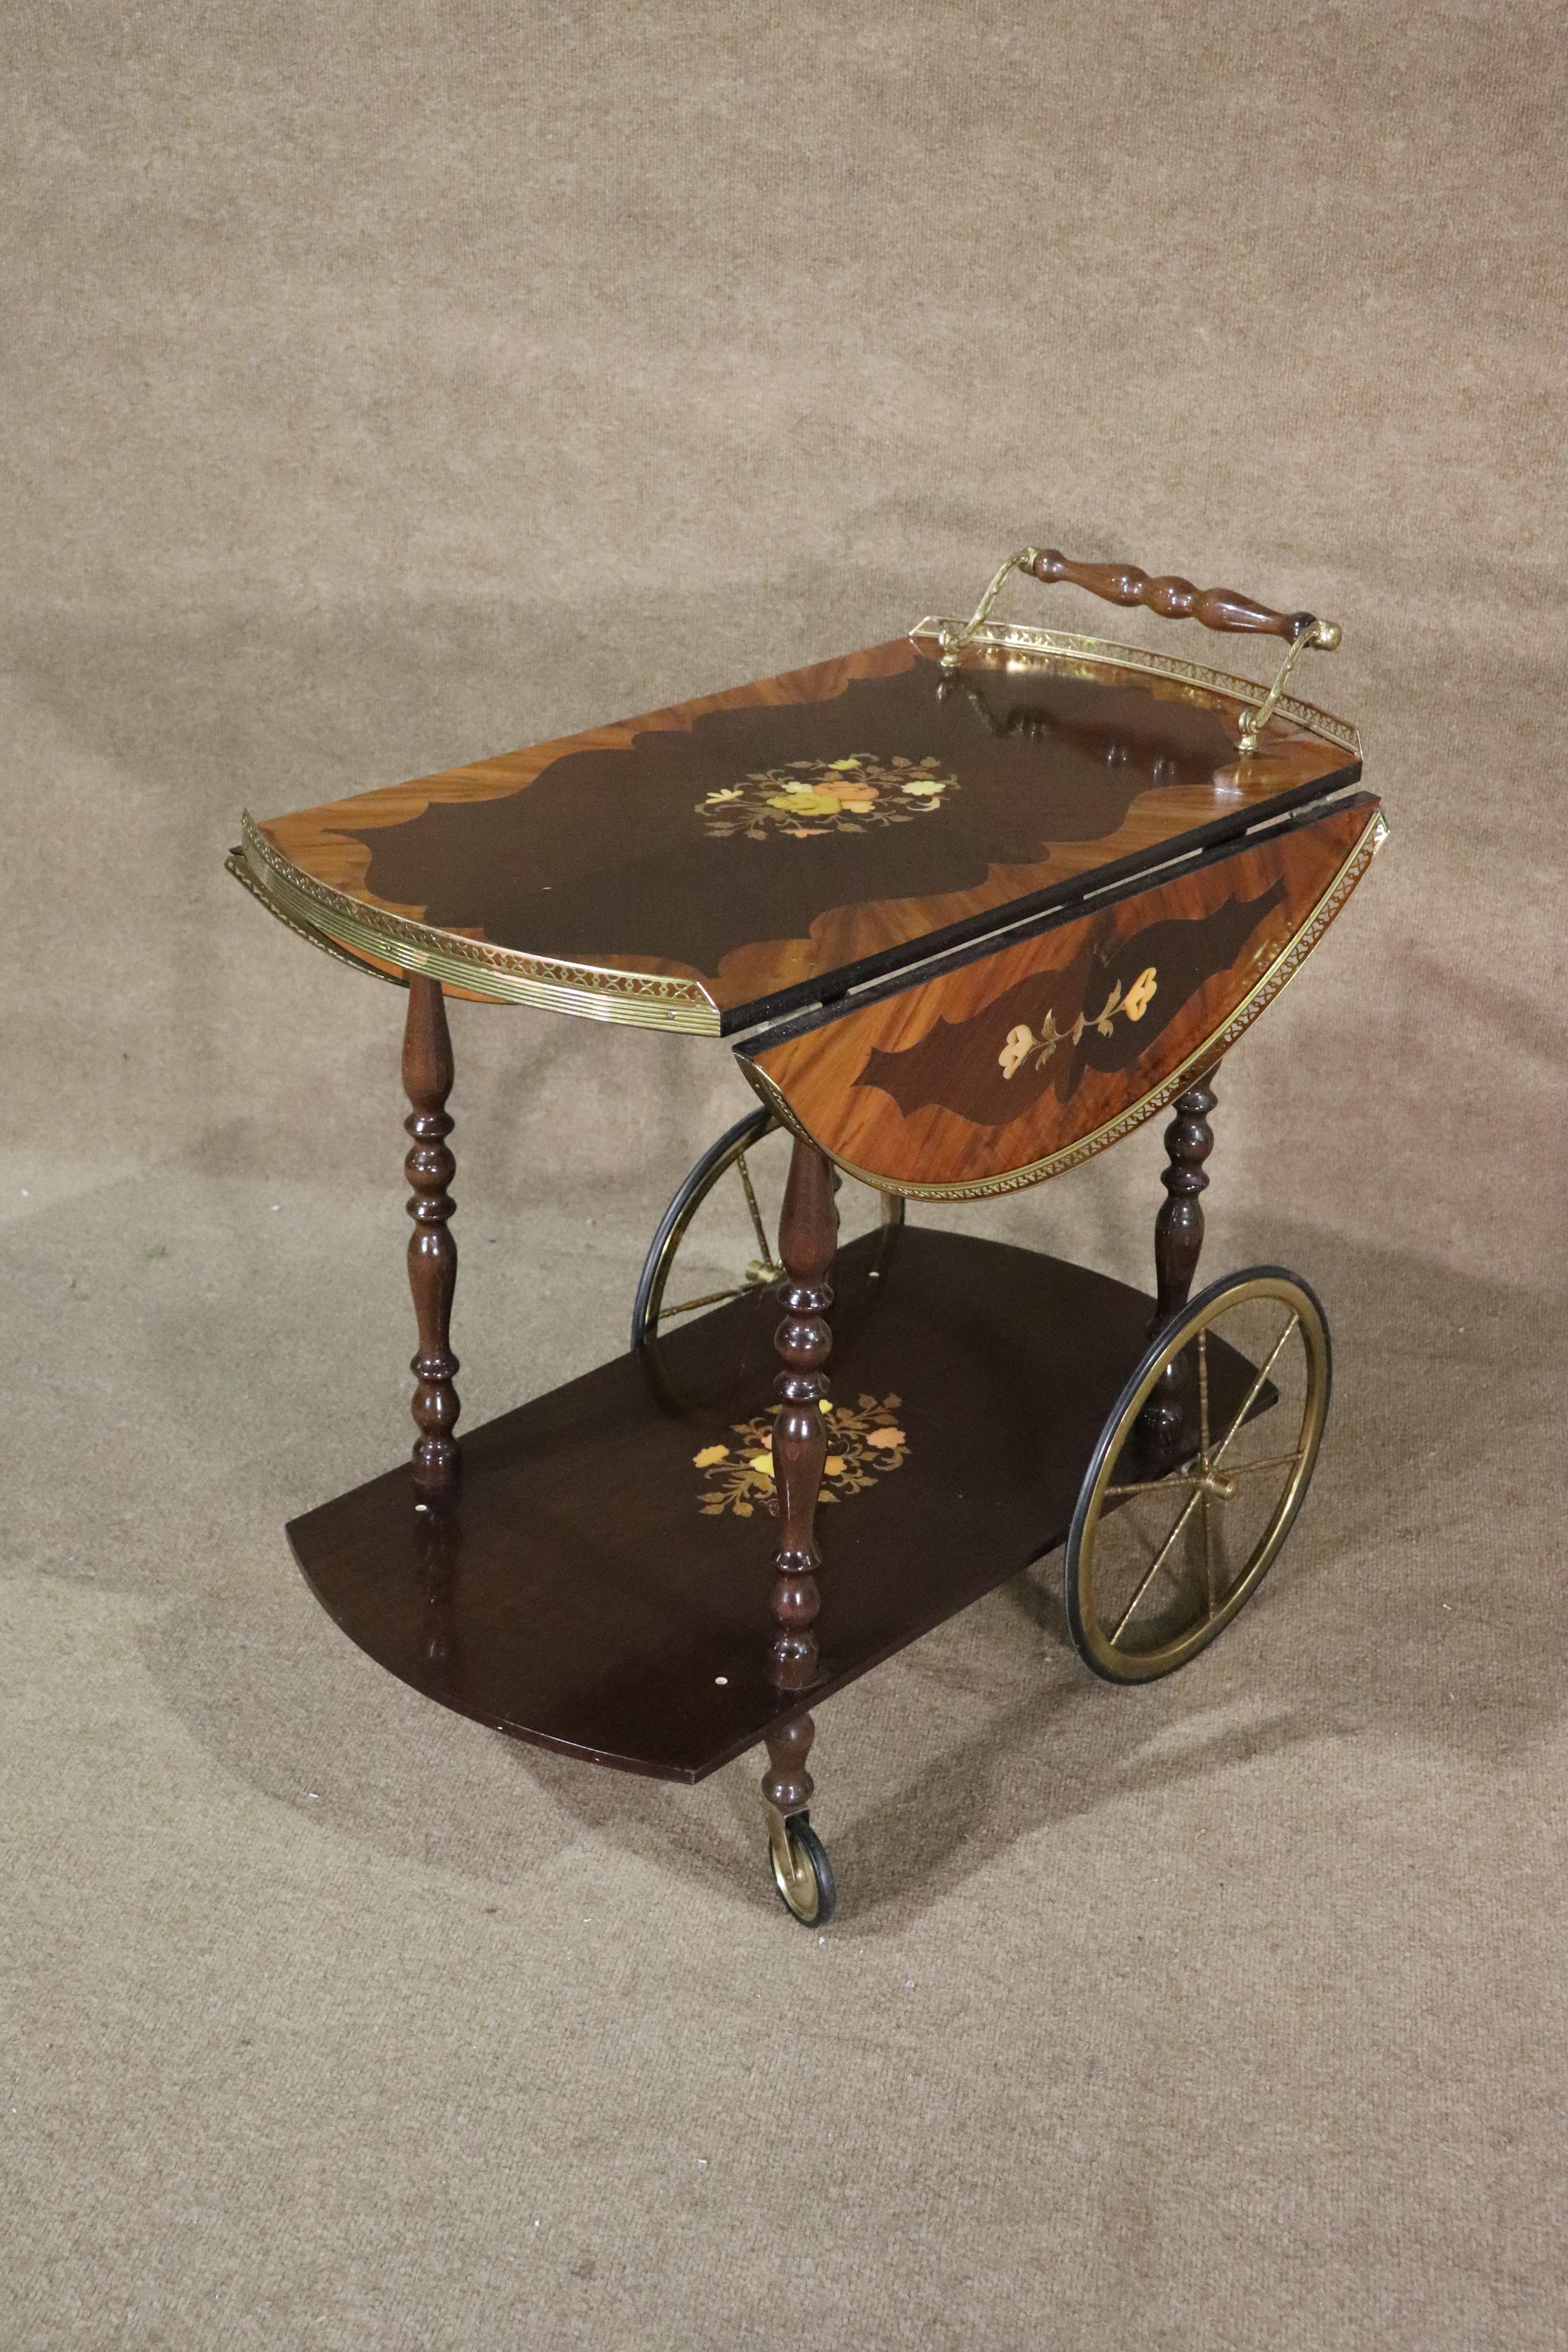 This beautiful rolling cart features an Italian style hand inlaid floral design and brass hardware. It has drop leaves that open to a round table top (29.75